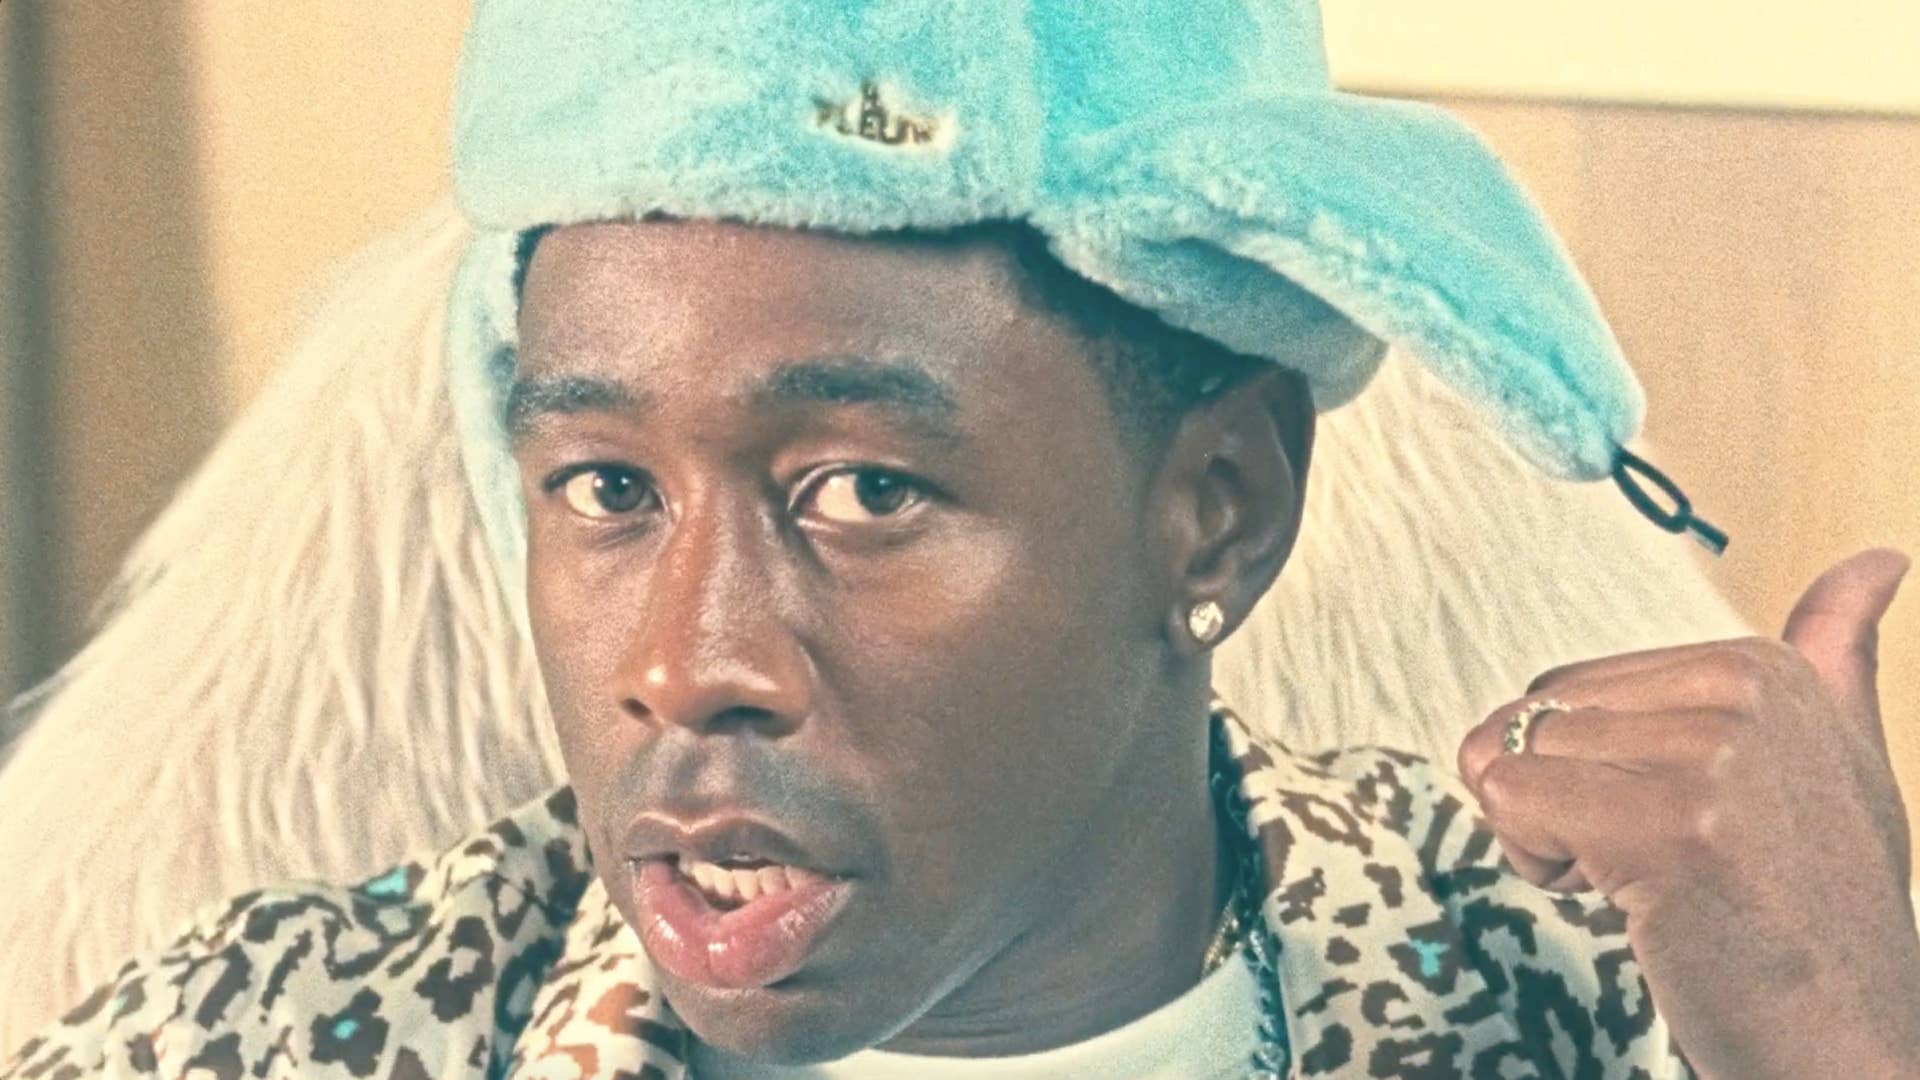 Tyler, the Creator Shows Off Another Legendary Watch in His